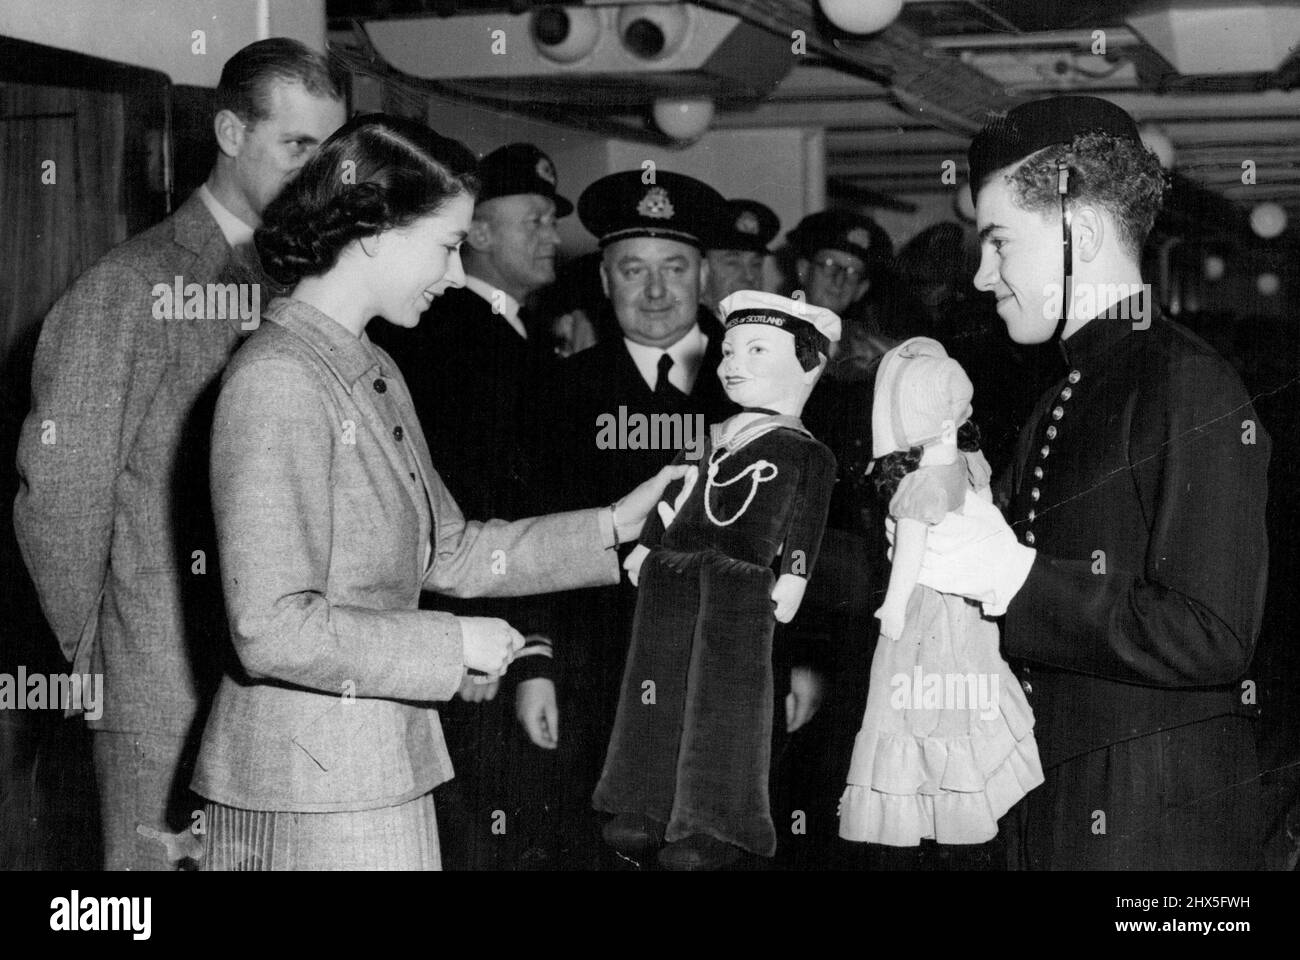 The Princess During Atlantic Crossing Special Pictures By S. Devon -- George Newcombe, Senior Beld boy on the ship, Presenting to Princess Elizabeth two dolls for Princess Anne and Prince Charles which were subscribed for be the ship's company. Also in the picture are the Duke of Edinburgh and Capt. C. E. Duggan, master of the 'Empress of Scotland'. Photographers released today show Princess Elizabeth during her trip from Canada on the S.S. 'Empress of Scotland' in which she landed at Liverpool yesterday. November 18, 1951. (Photo by Paul Popper). Stock Photo